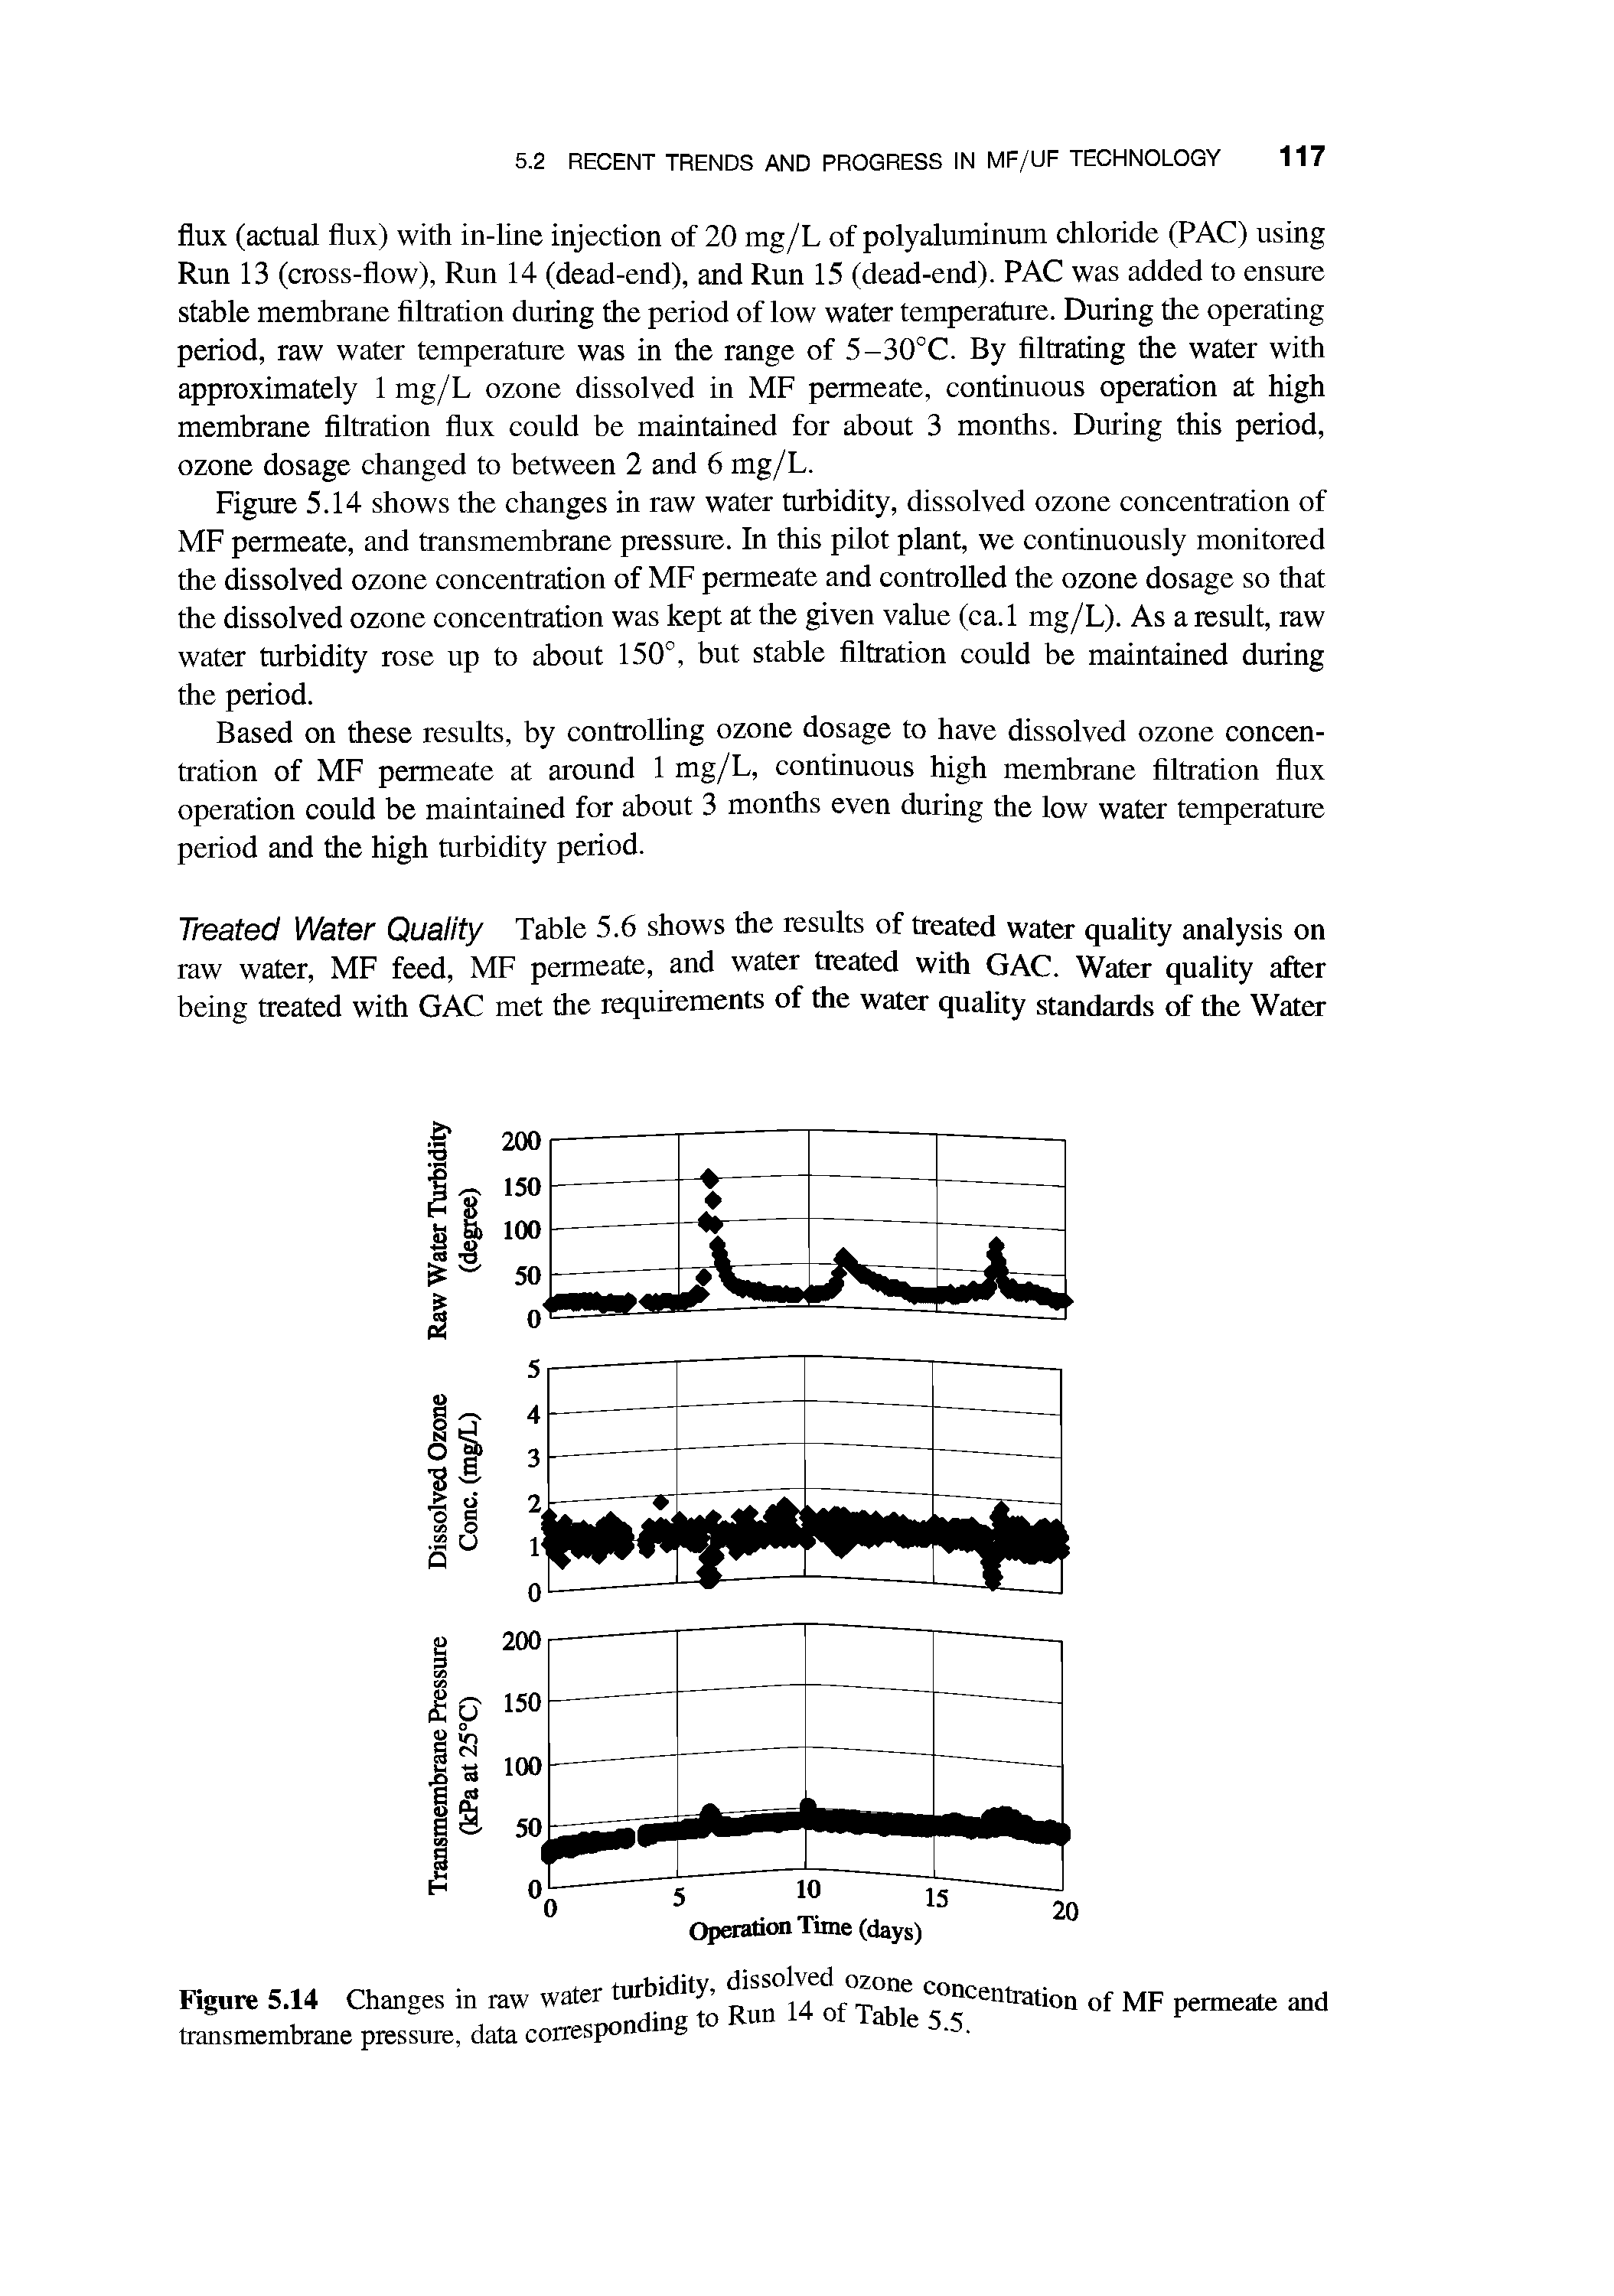 Figure 5.14 Changes in raw water turbidity, dissolved ozone concentration of MF permeate and transmembrane pressure, data corresponding to Run 14 of Table 5.5.